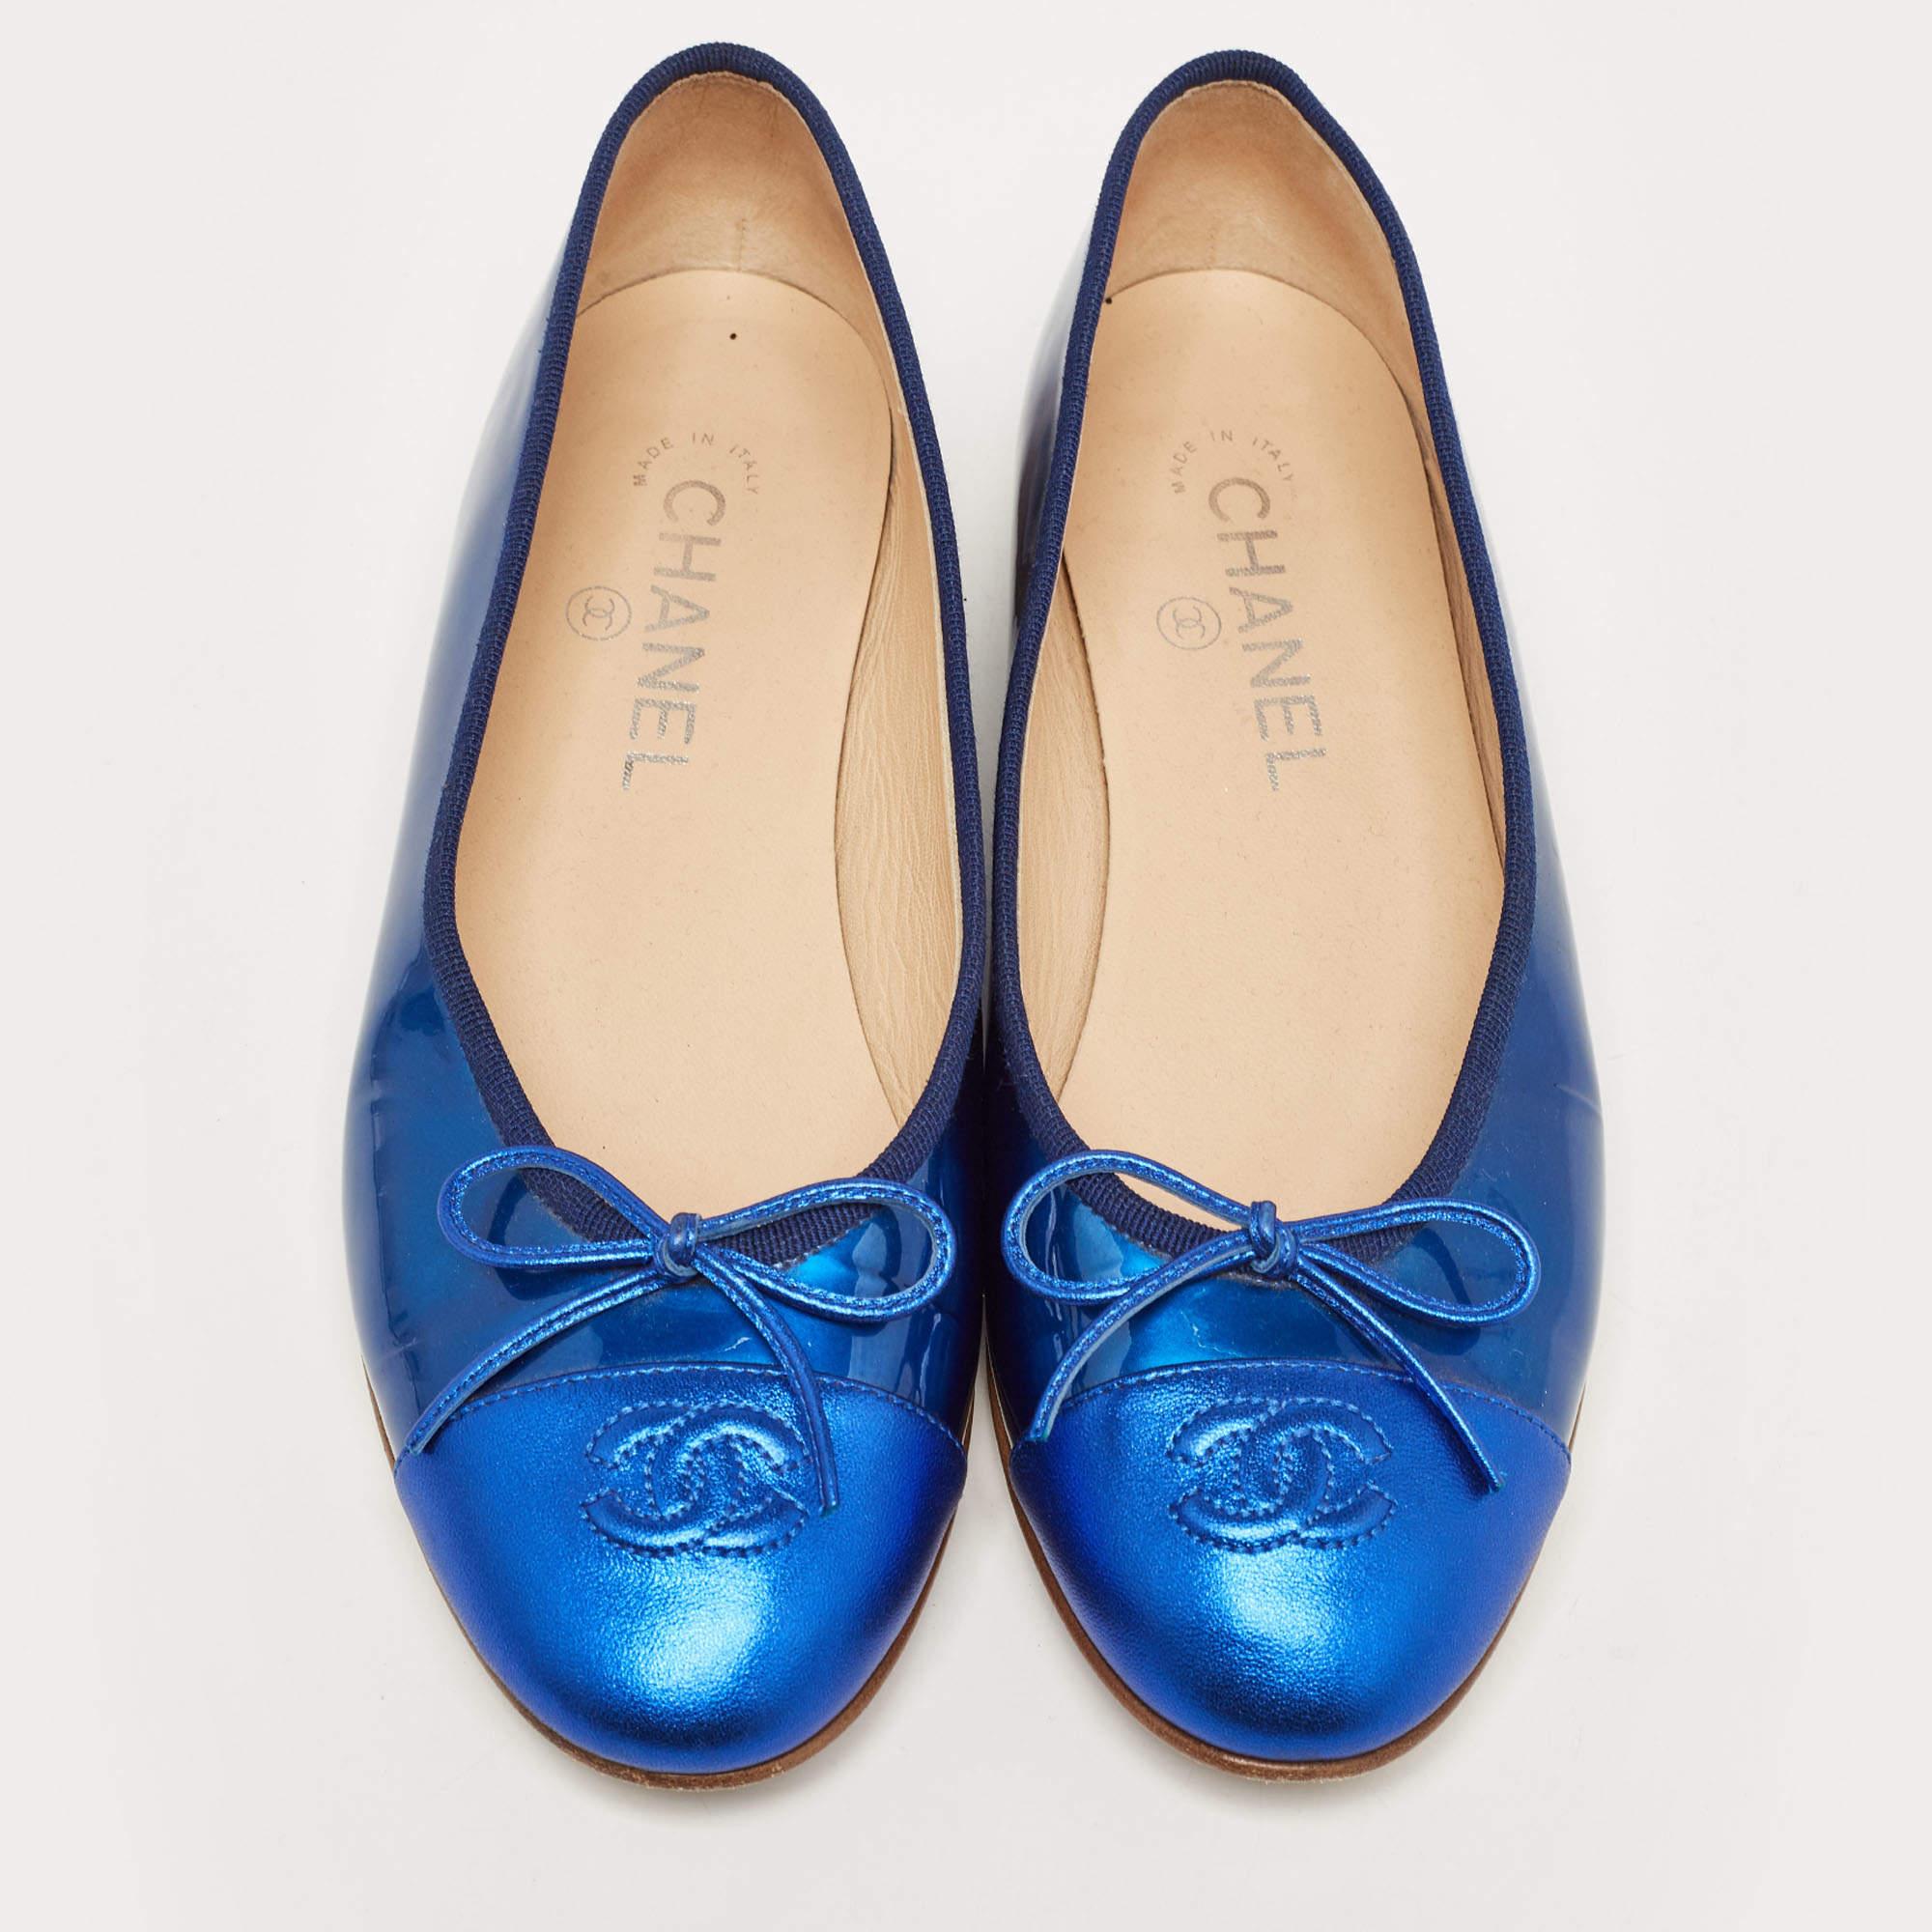 Complete your look by adding these Chanel ballet flats to your lovely wardrobe. They are crafted skilfully to grant the perfect fit and style.

Includes
Original Dustbag